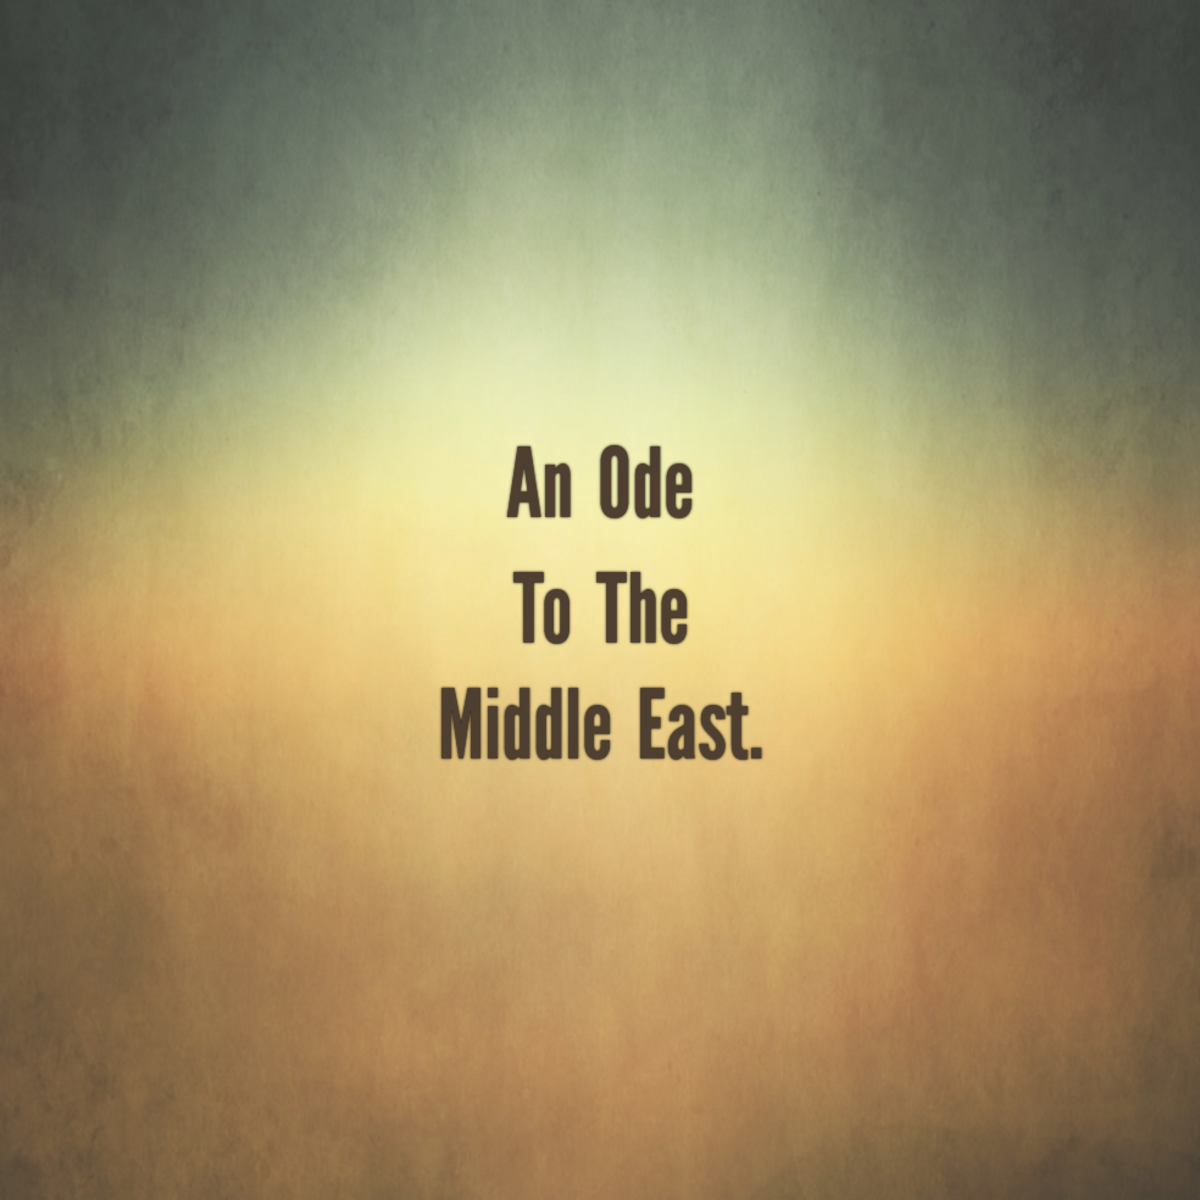 An Ode to the Middle East.